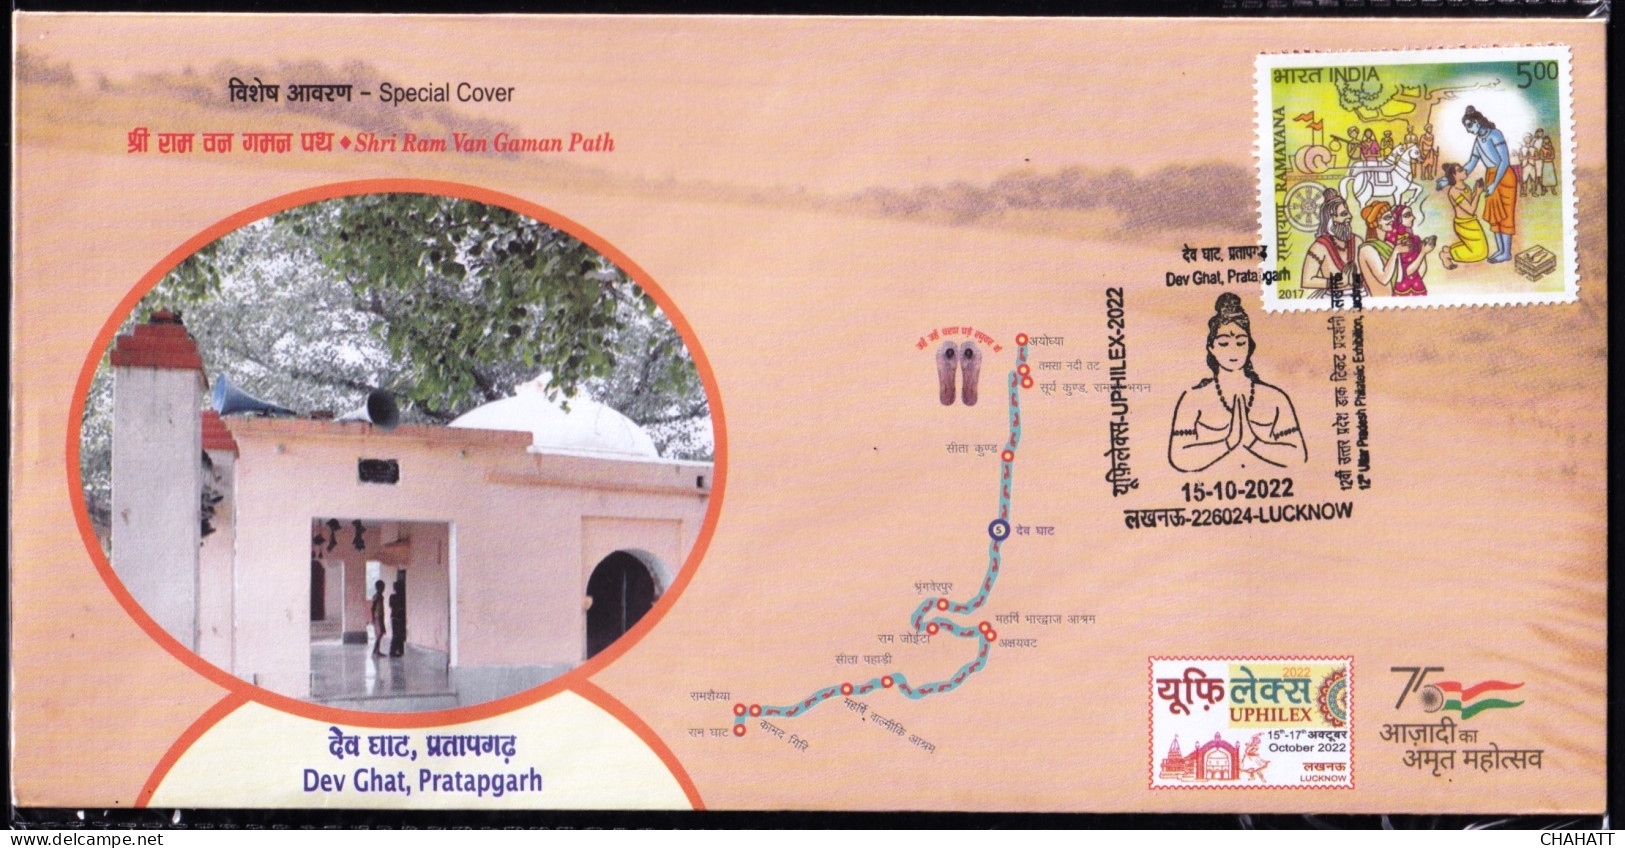 HINDUISM - RAMAYAN-  DEV GHAT, PRATAPGARH - PICTORIAL CANCELLATION - SPECIAL COVER - INDIA -2022- BX4-23 - Induismo